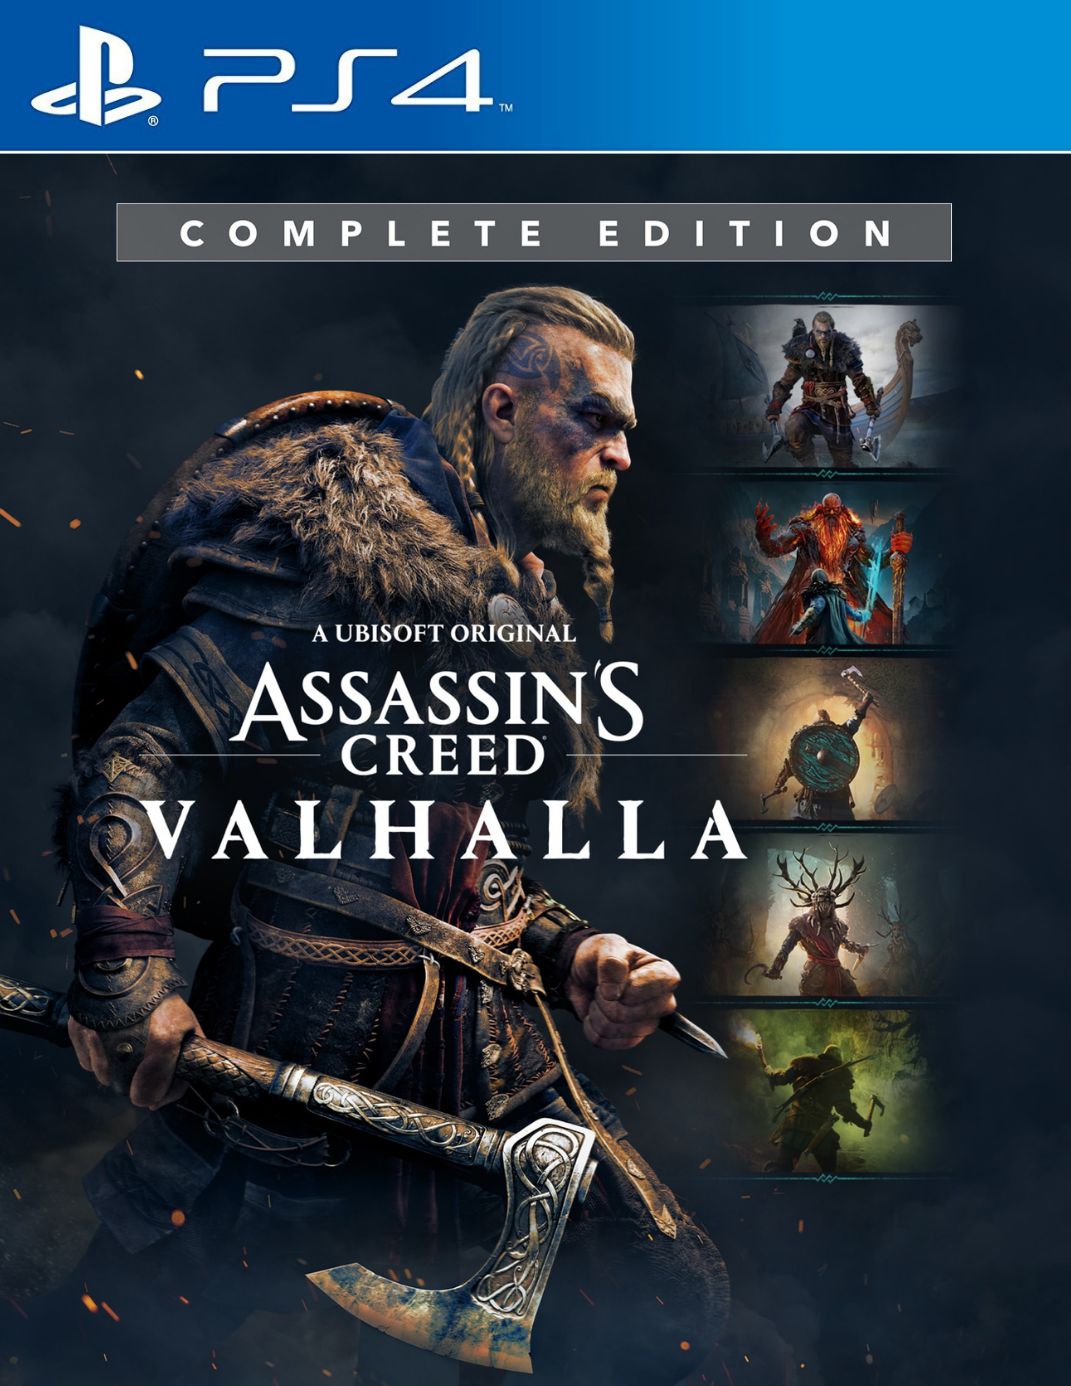 Assassin's Creed Valhalla for PC,PS4/PS5 (Digital),Xbox (Digital